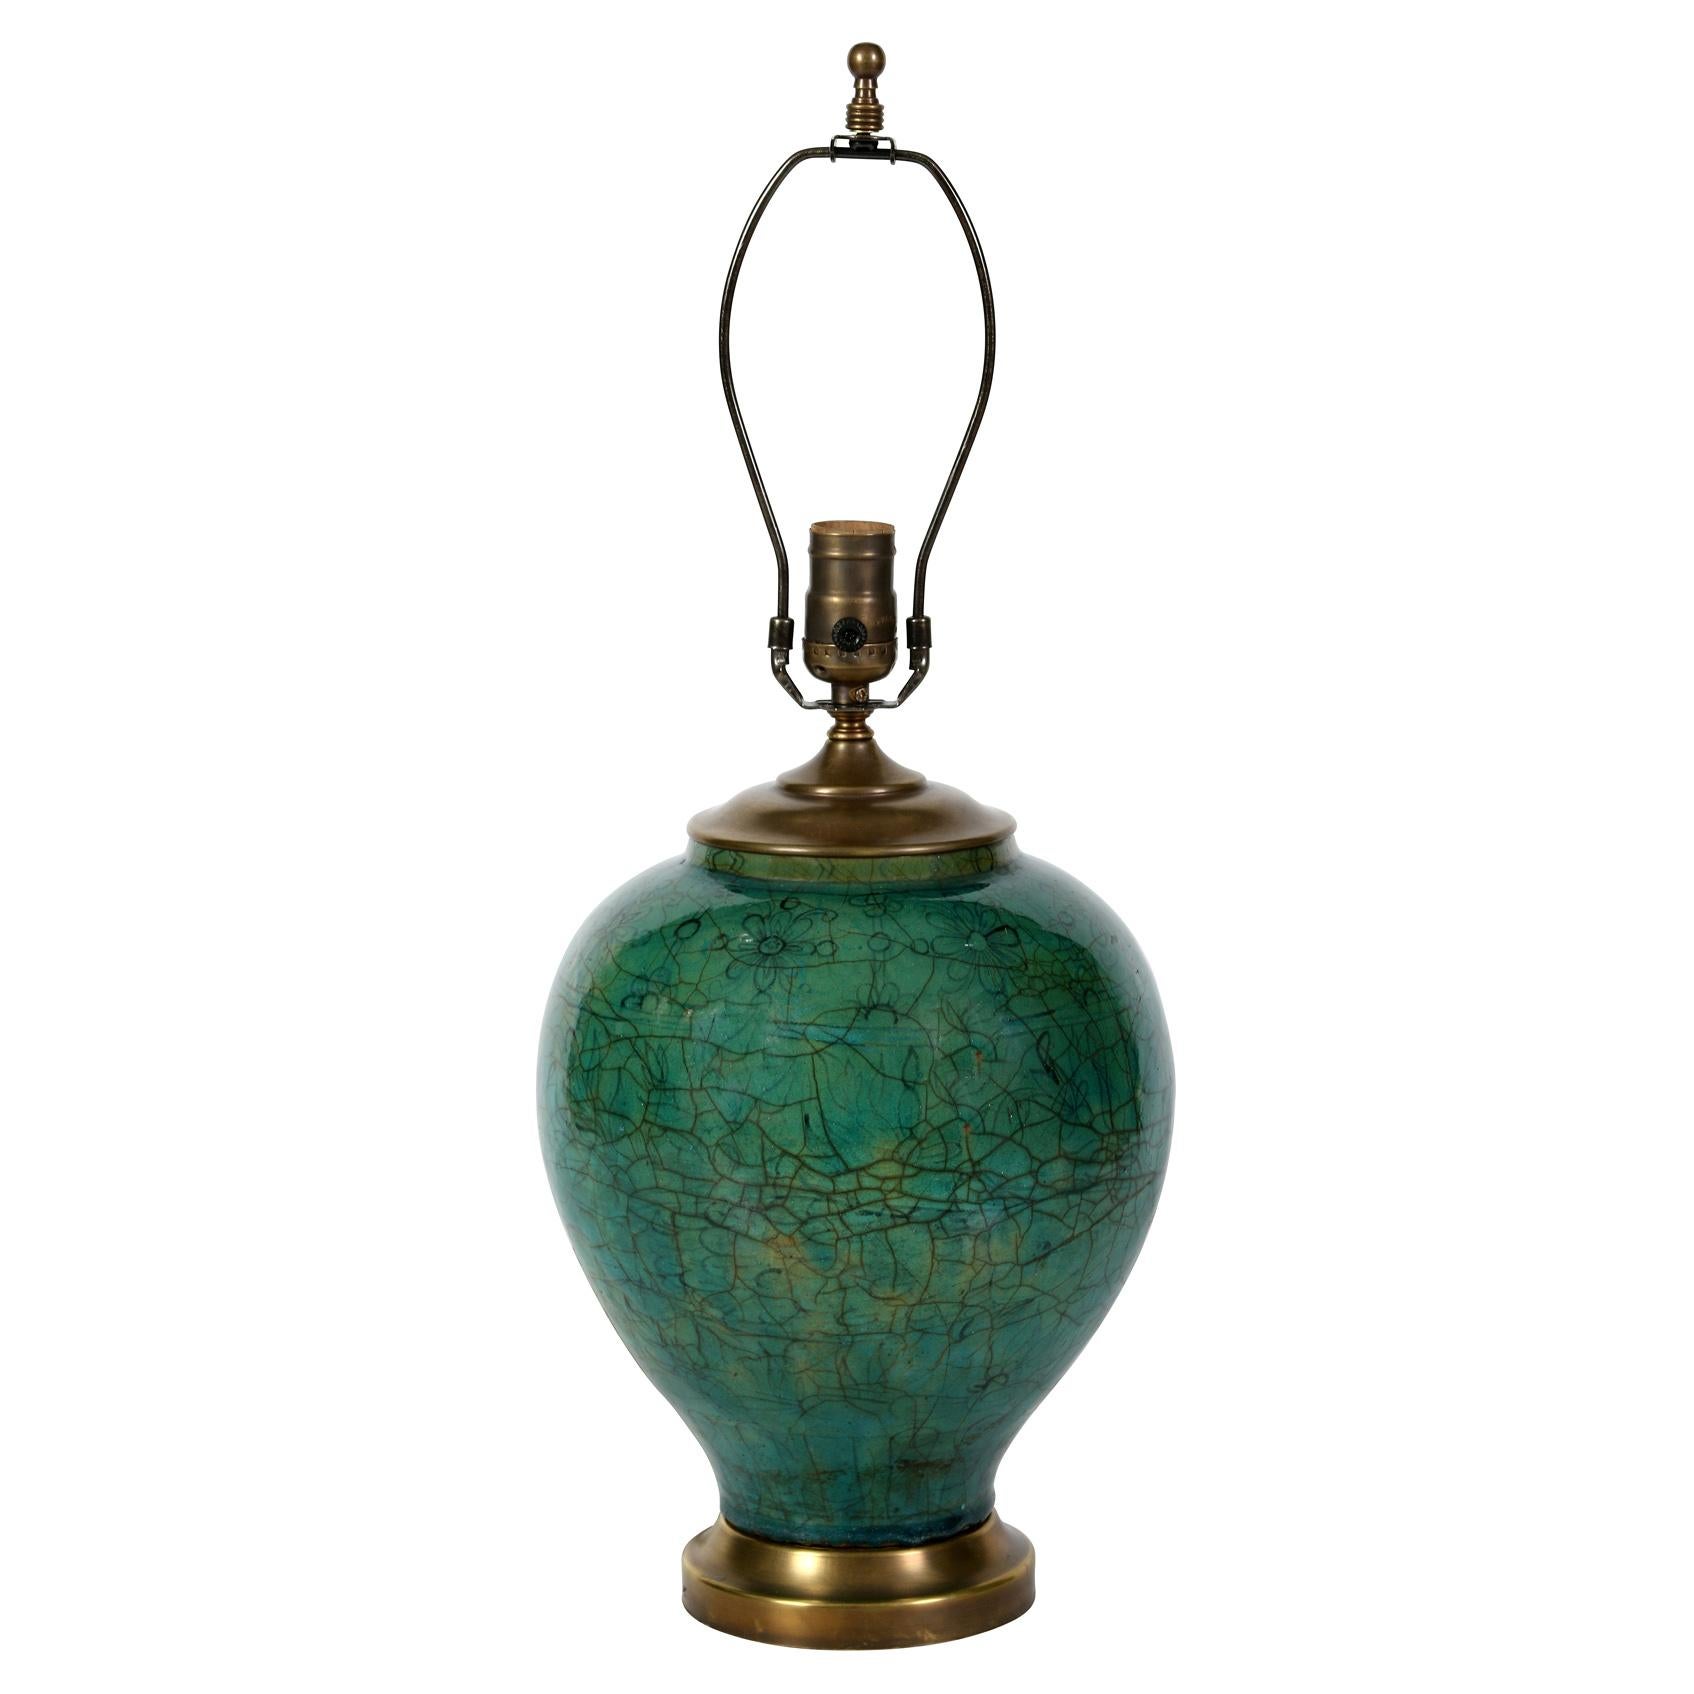 A green ceramic lamp in the Asian style, with a crackled glaze in a deep jade green.  Mounted on a brass base, the lamp has a pleated linen shade.